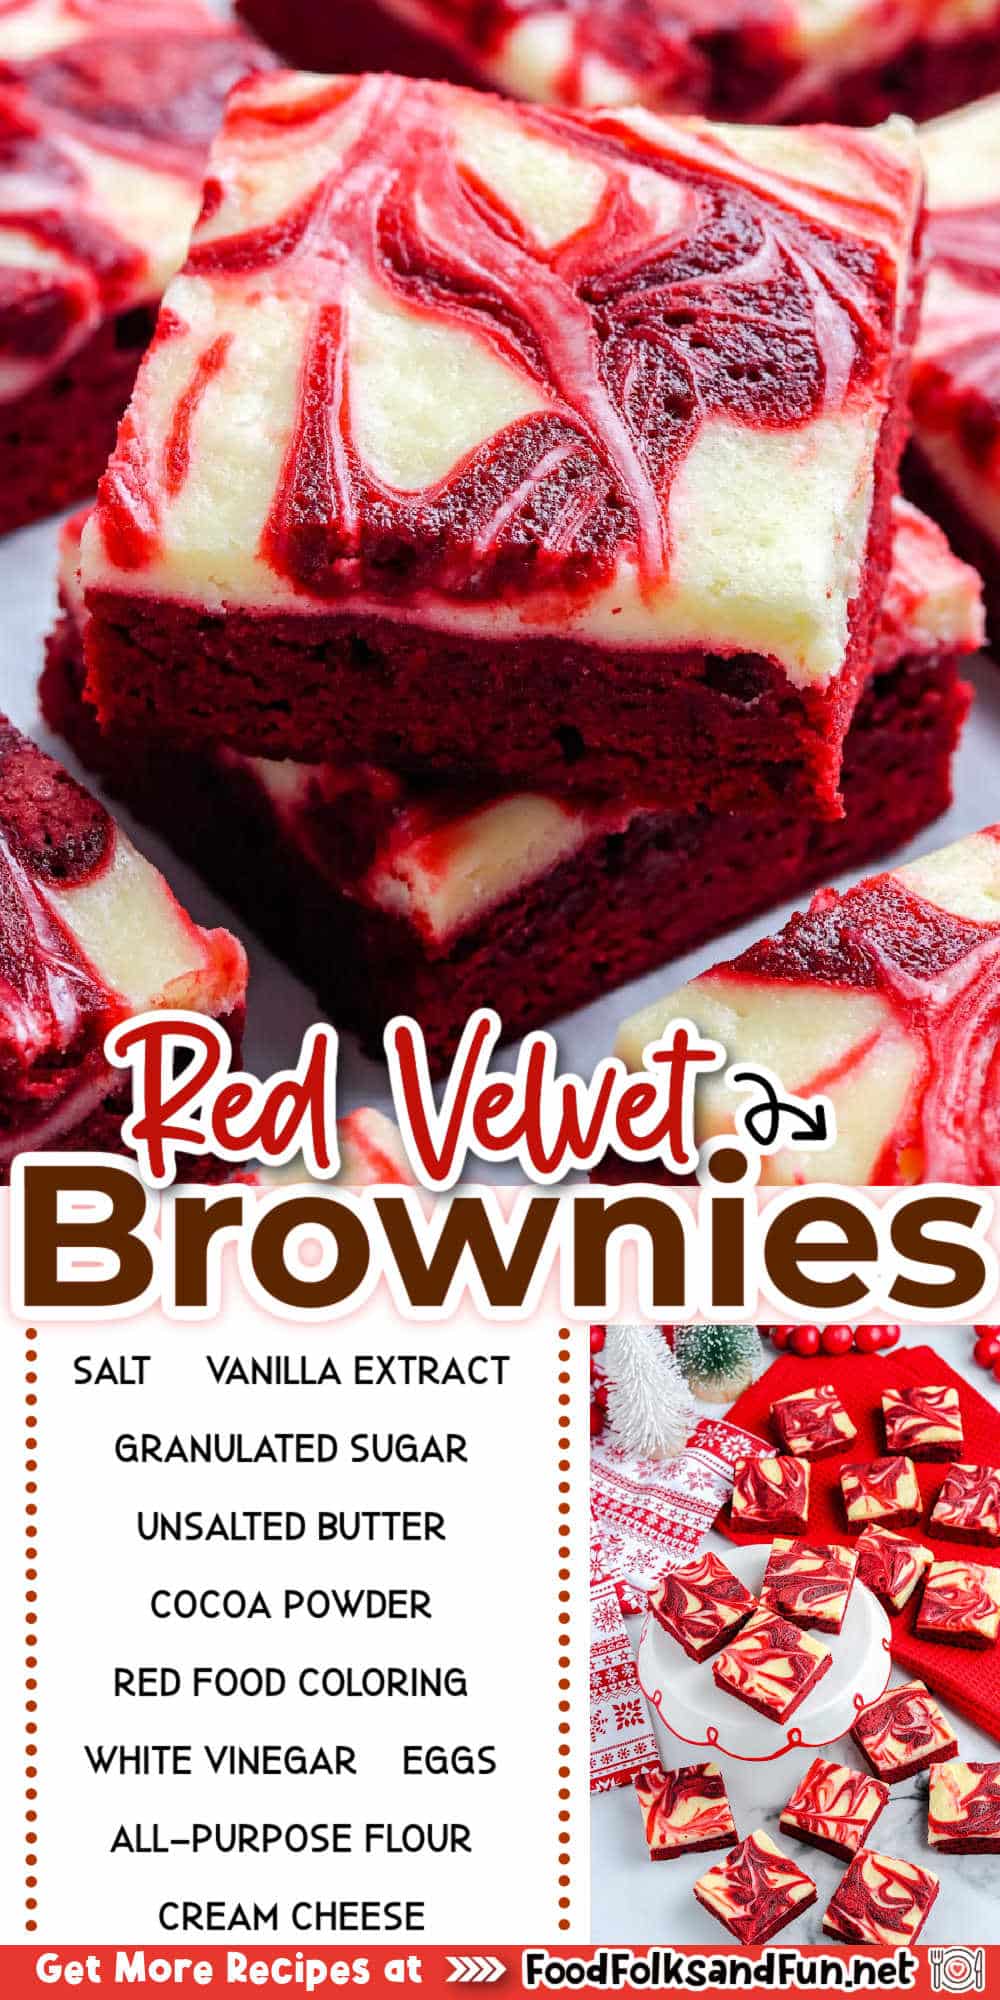 These Red Velvet Brownies are fudgy, moist, and completely homemade and satisfy any sweet tooth. via @foodfolksandfun